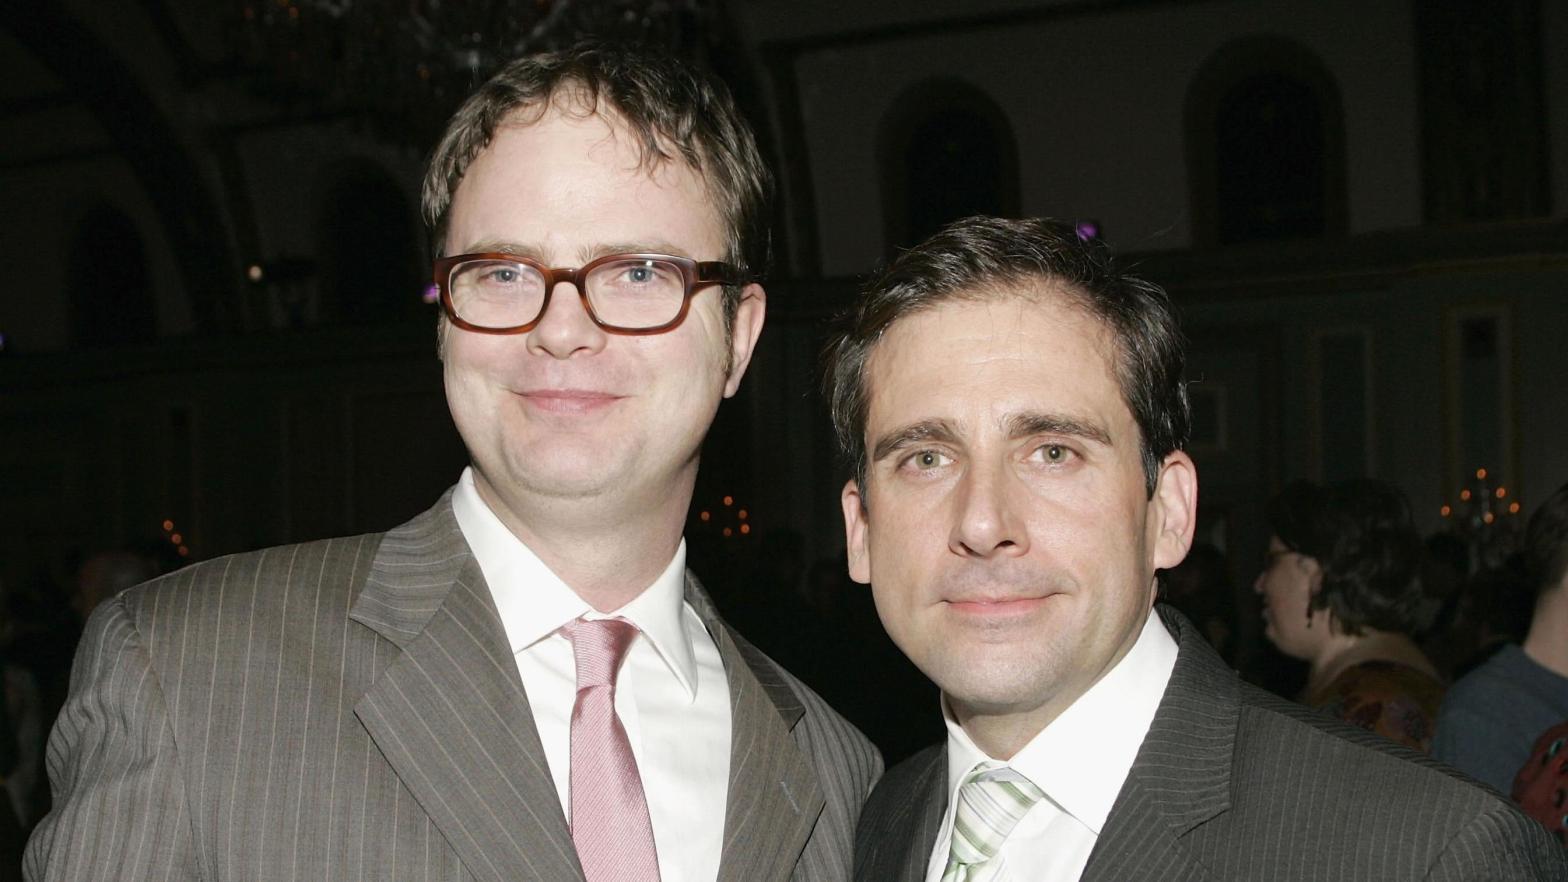 'The Office' actors Rainn Wilson (Dwight Schrute) and Steve Carell (Michael Scott) on January 22, 2006 in Los Angeles, California. (Photo: Michael Buckner, Getty Images)